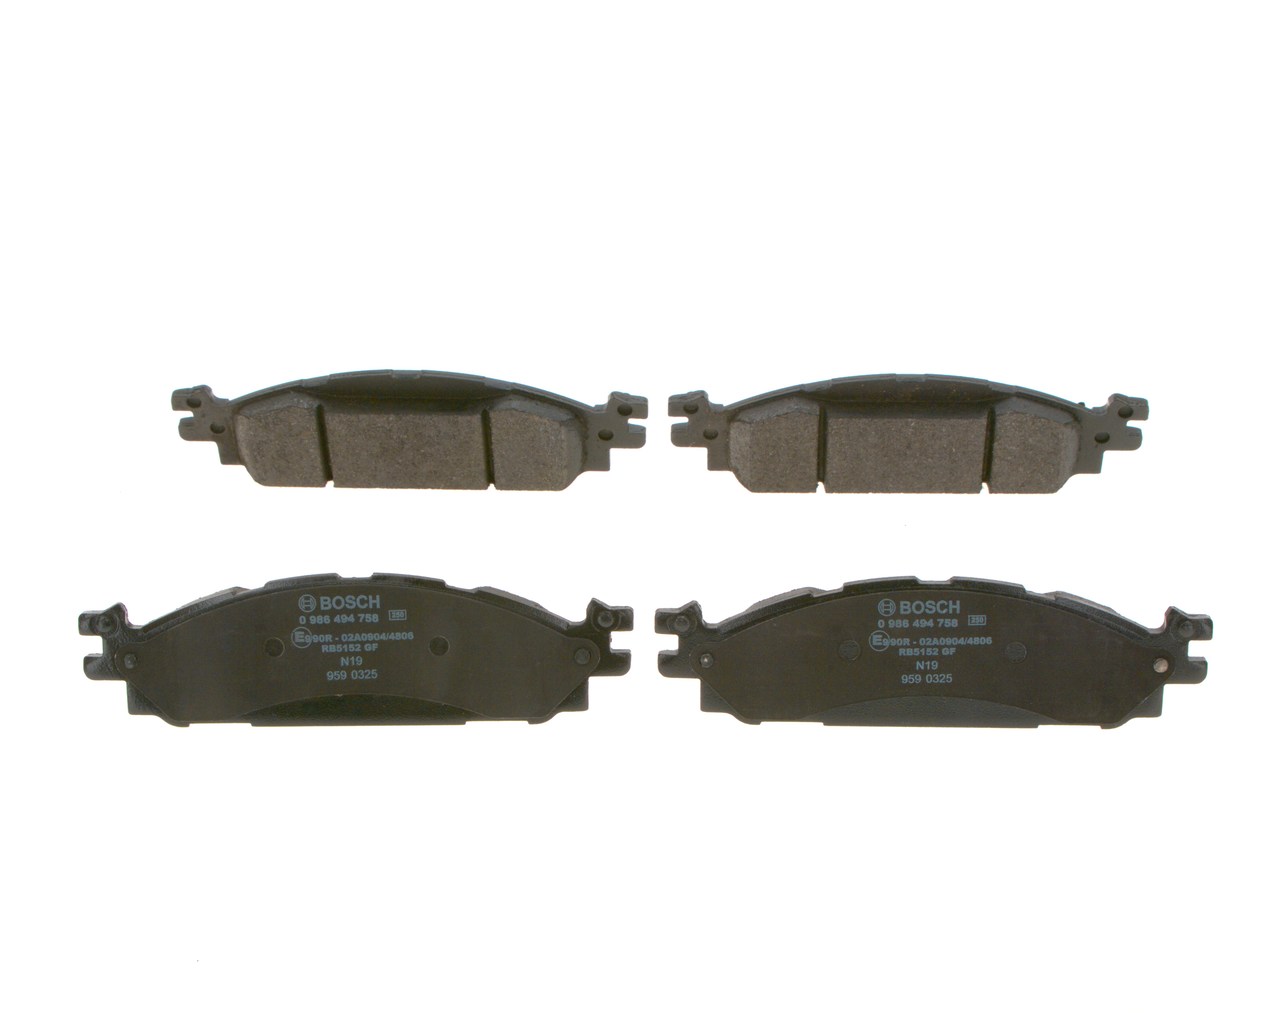 BOSCH 0 986 494 758 Brake pad set FORD USA experience and price